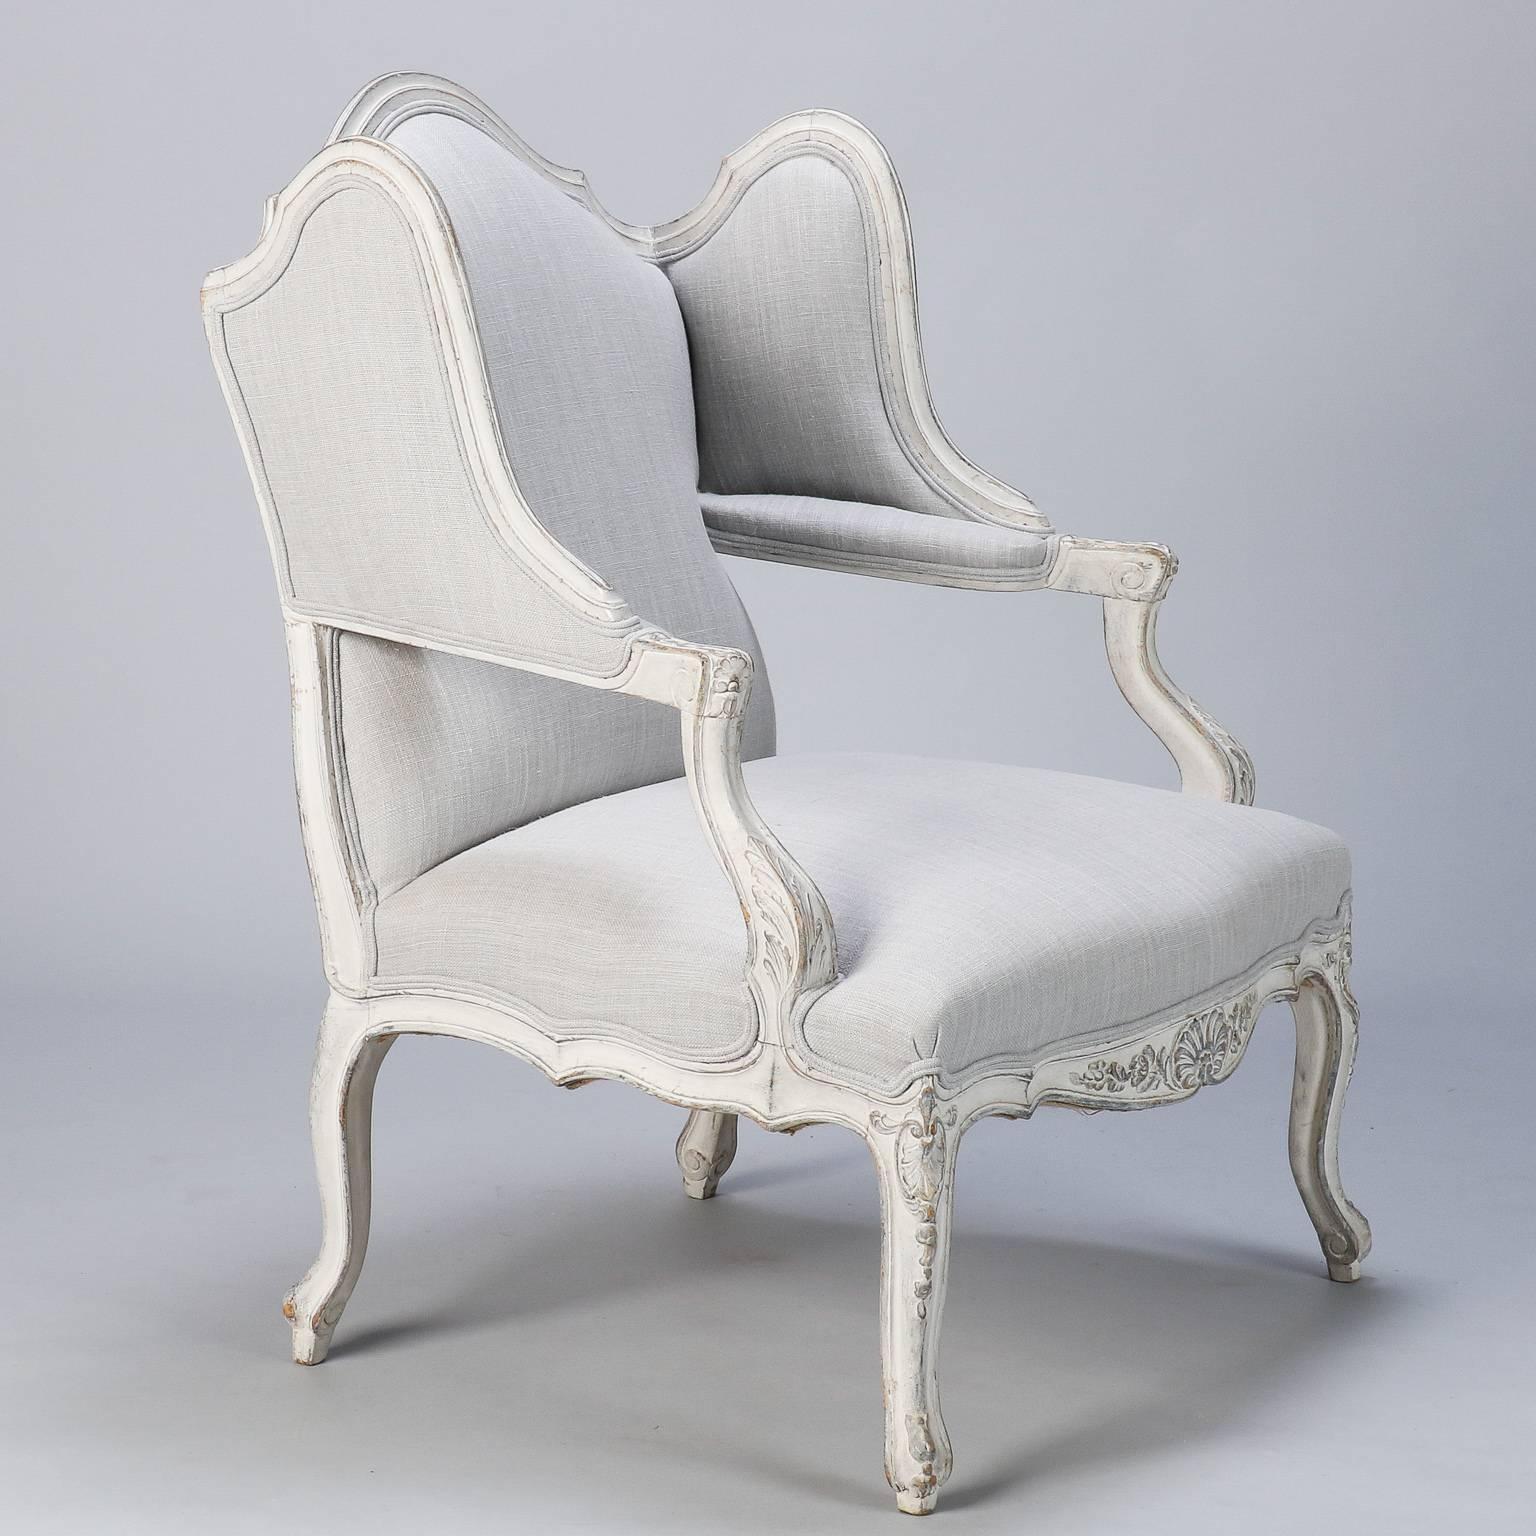 Circa 1940s bergere has Regency style frame with antique white painted finish. Winged sides meet the arms, the chair has a crested back rest,  cabriole legs and apron with carved details. Newly upholstered in pale gray linen fabric. 

Arm Height: 